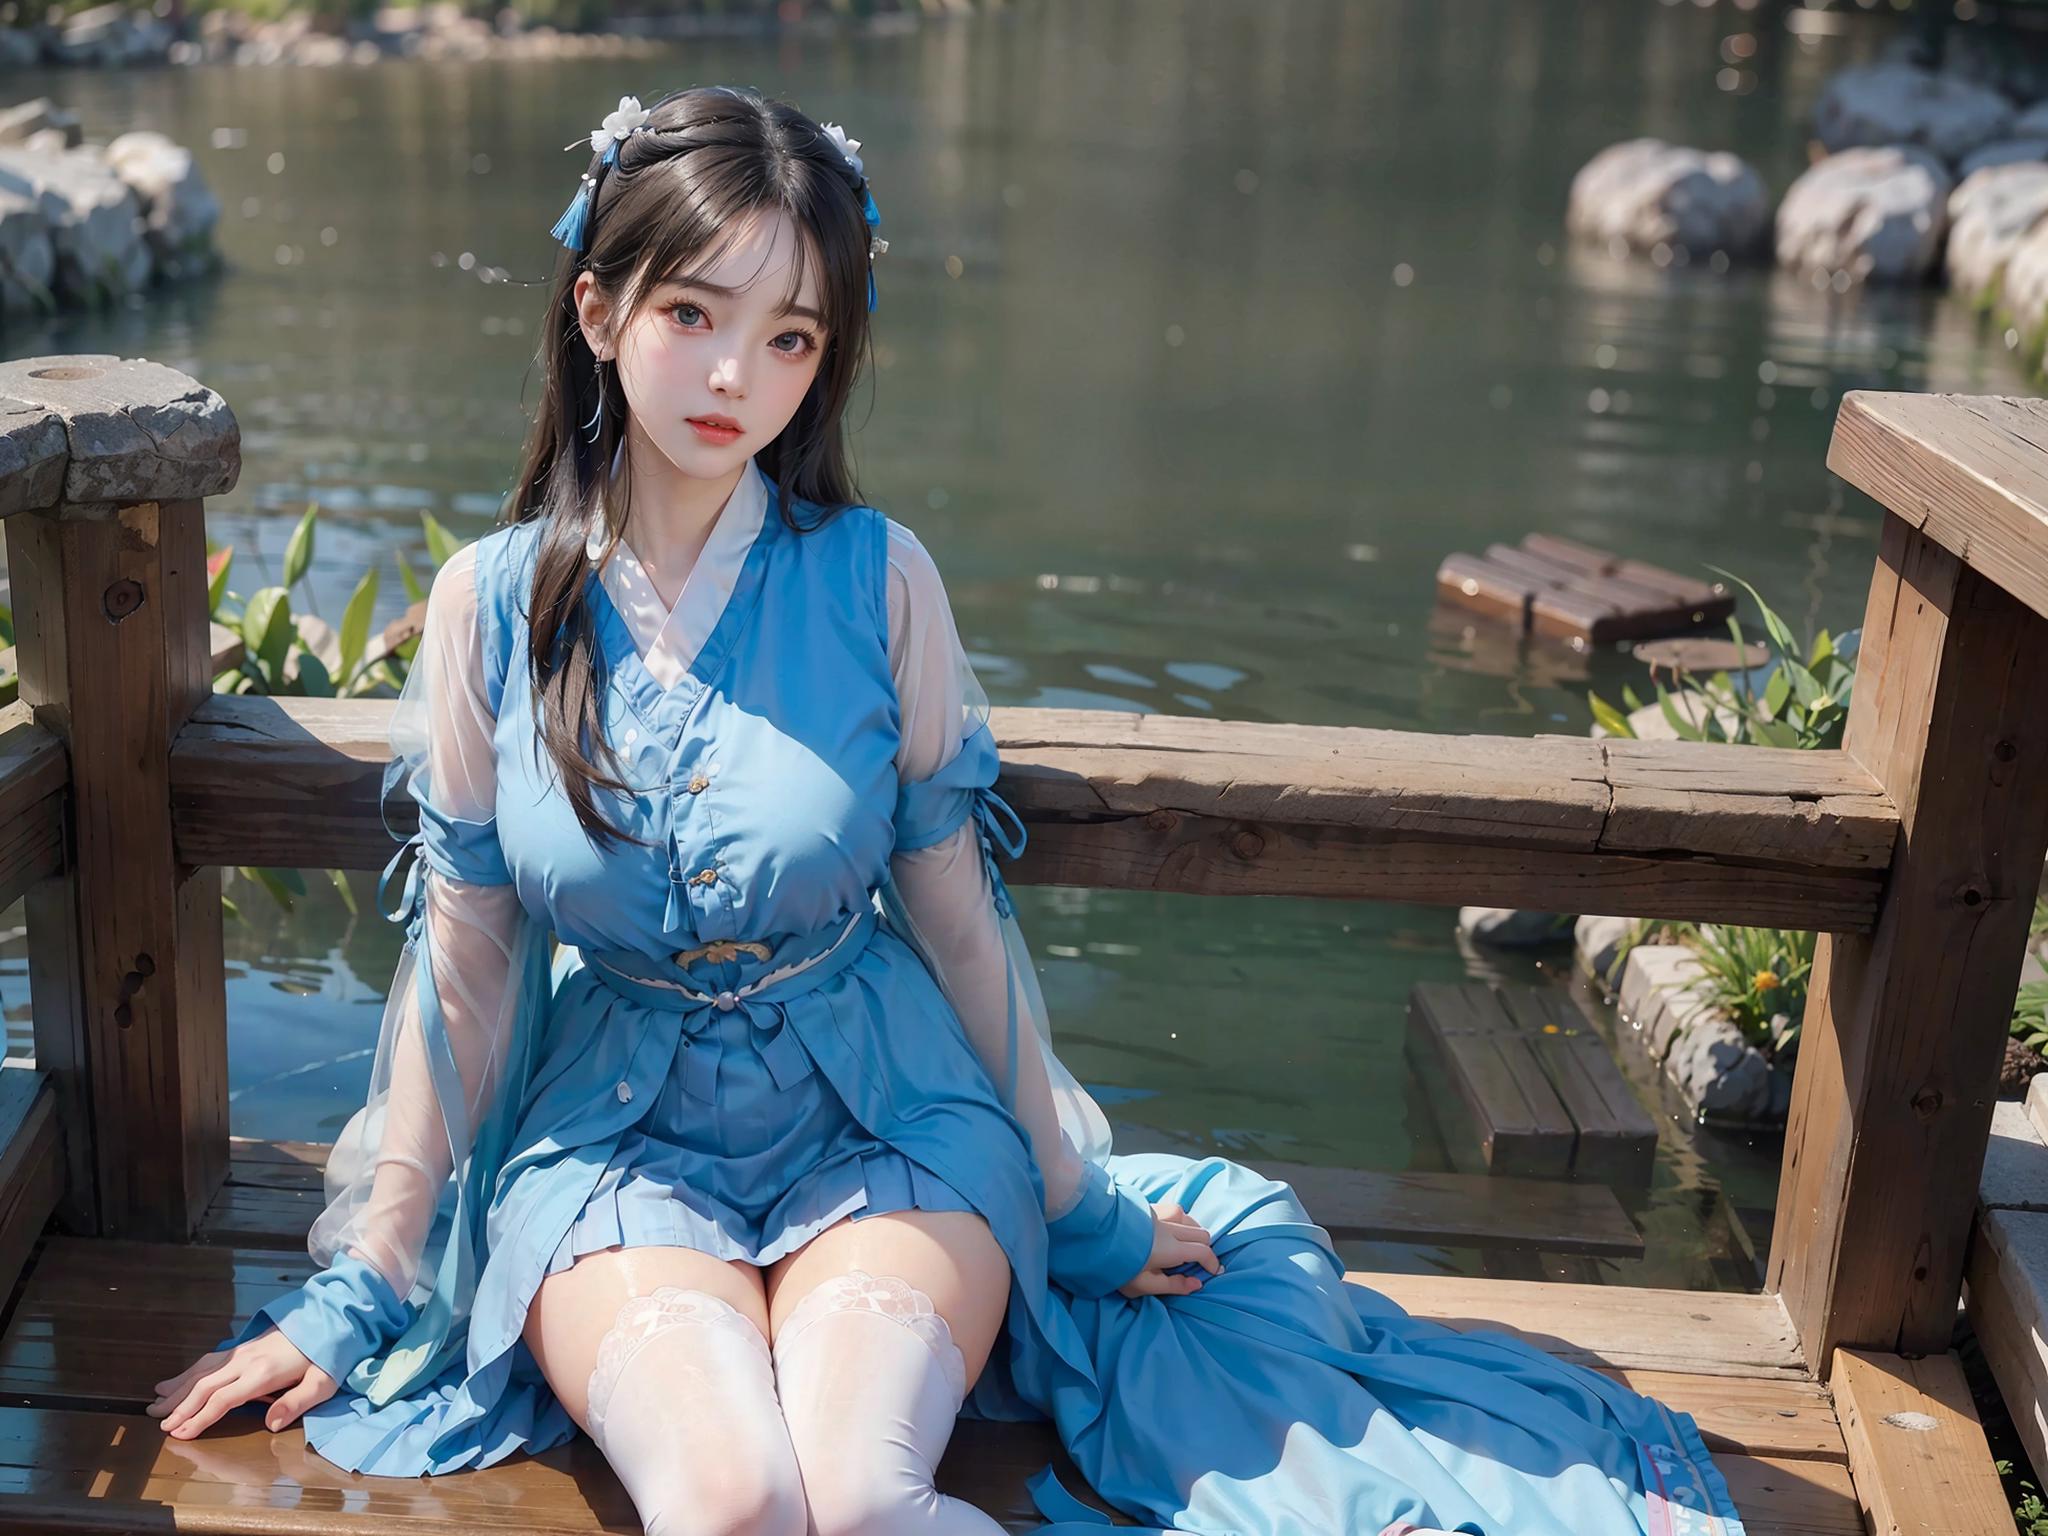 A young woman in a blue dress sitting on a bench by a body of water.